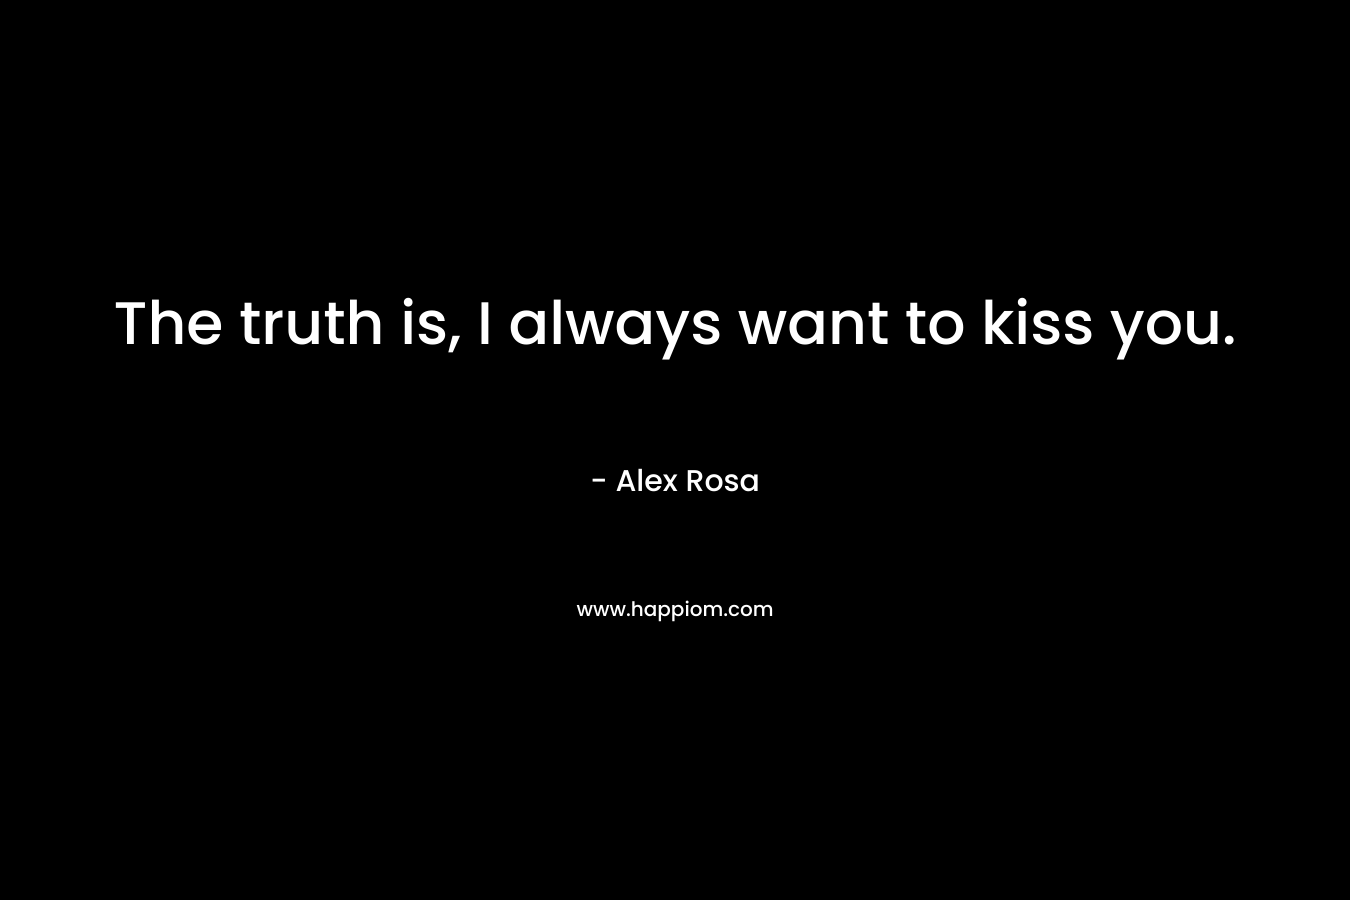 The truth is, I always want to kiss you. – Alex Rosa